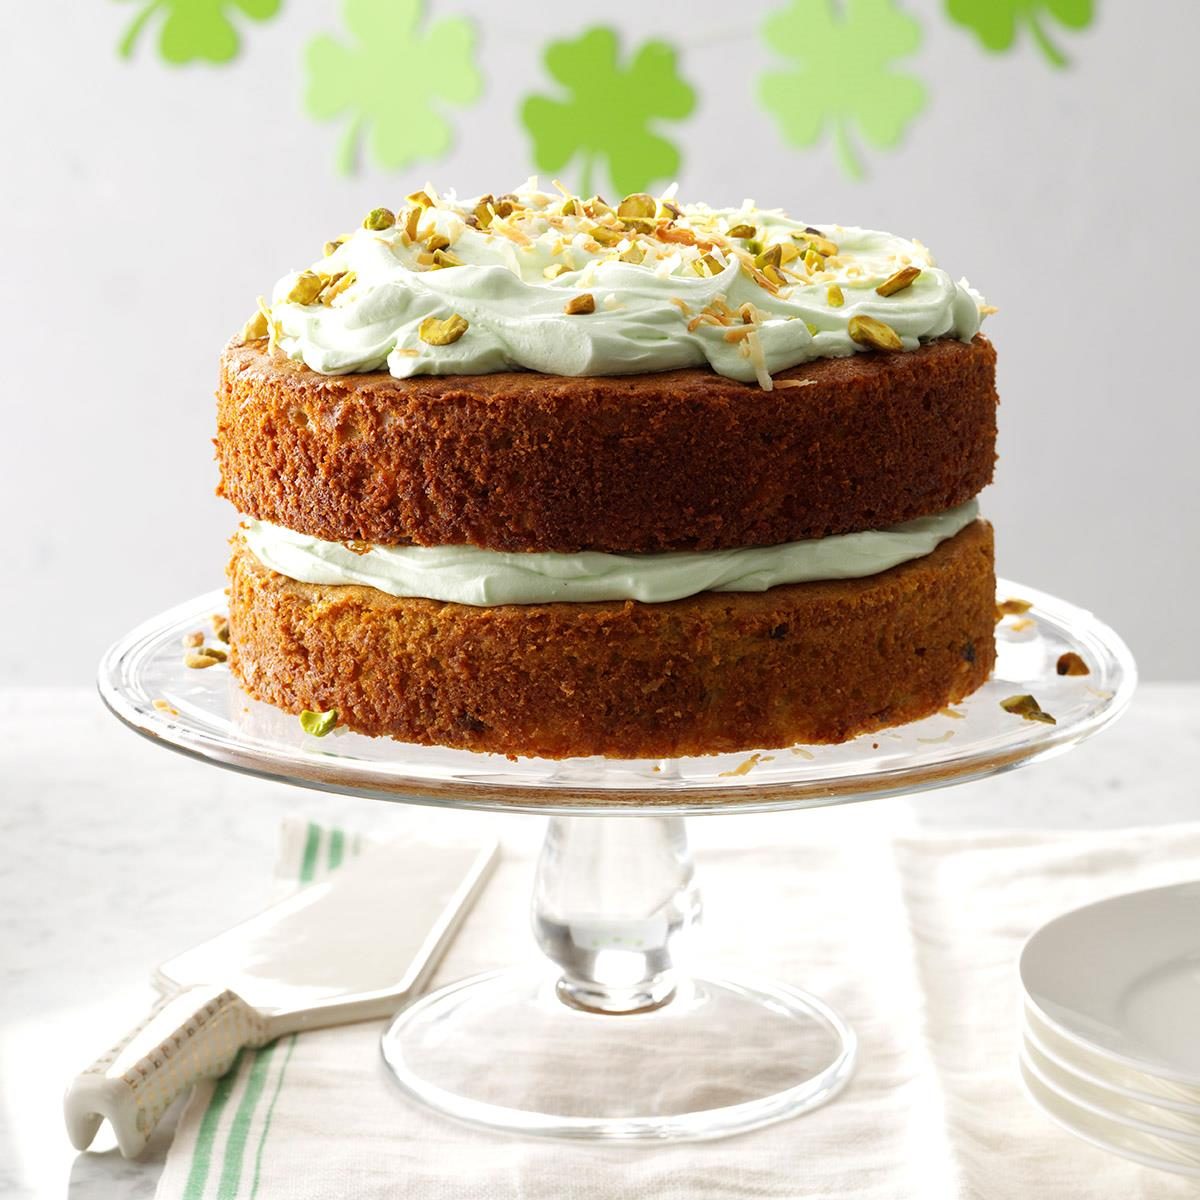 This coconut cake is good any time of the year, but the color is perfect for St. Patrick's Day. The secret is adding instant pistachio pudding mix into the cake mix and the frosting. —Dora May Meredith, Rockford, Illinois <a href="https://www.tasteofhome.com/recipes/pistachio-and-coconut-cake/">Get Recipe</a>